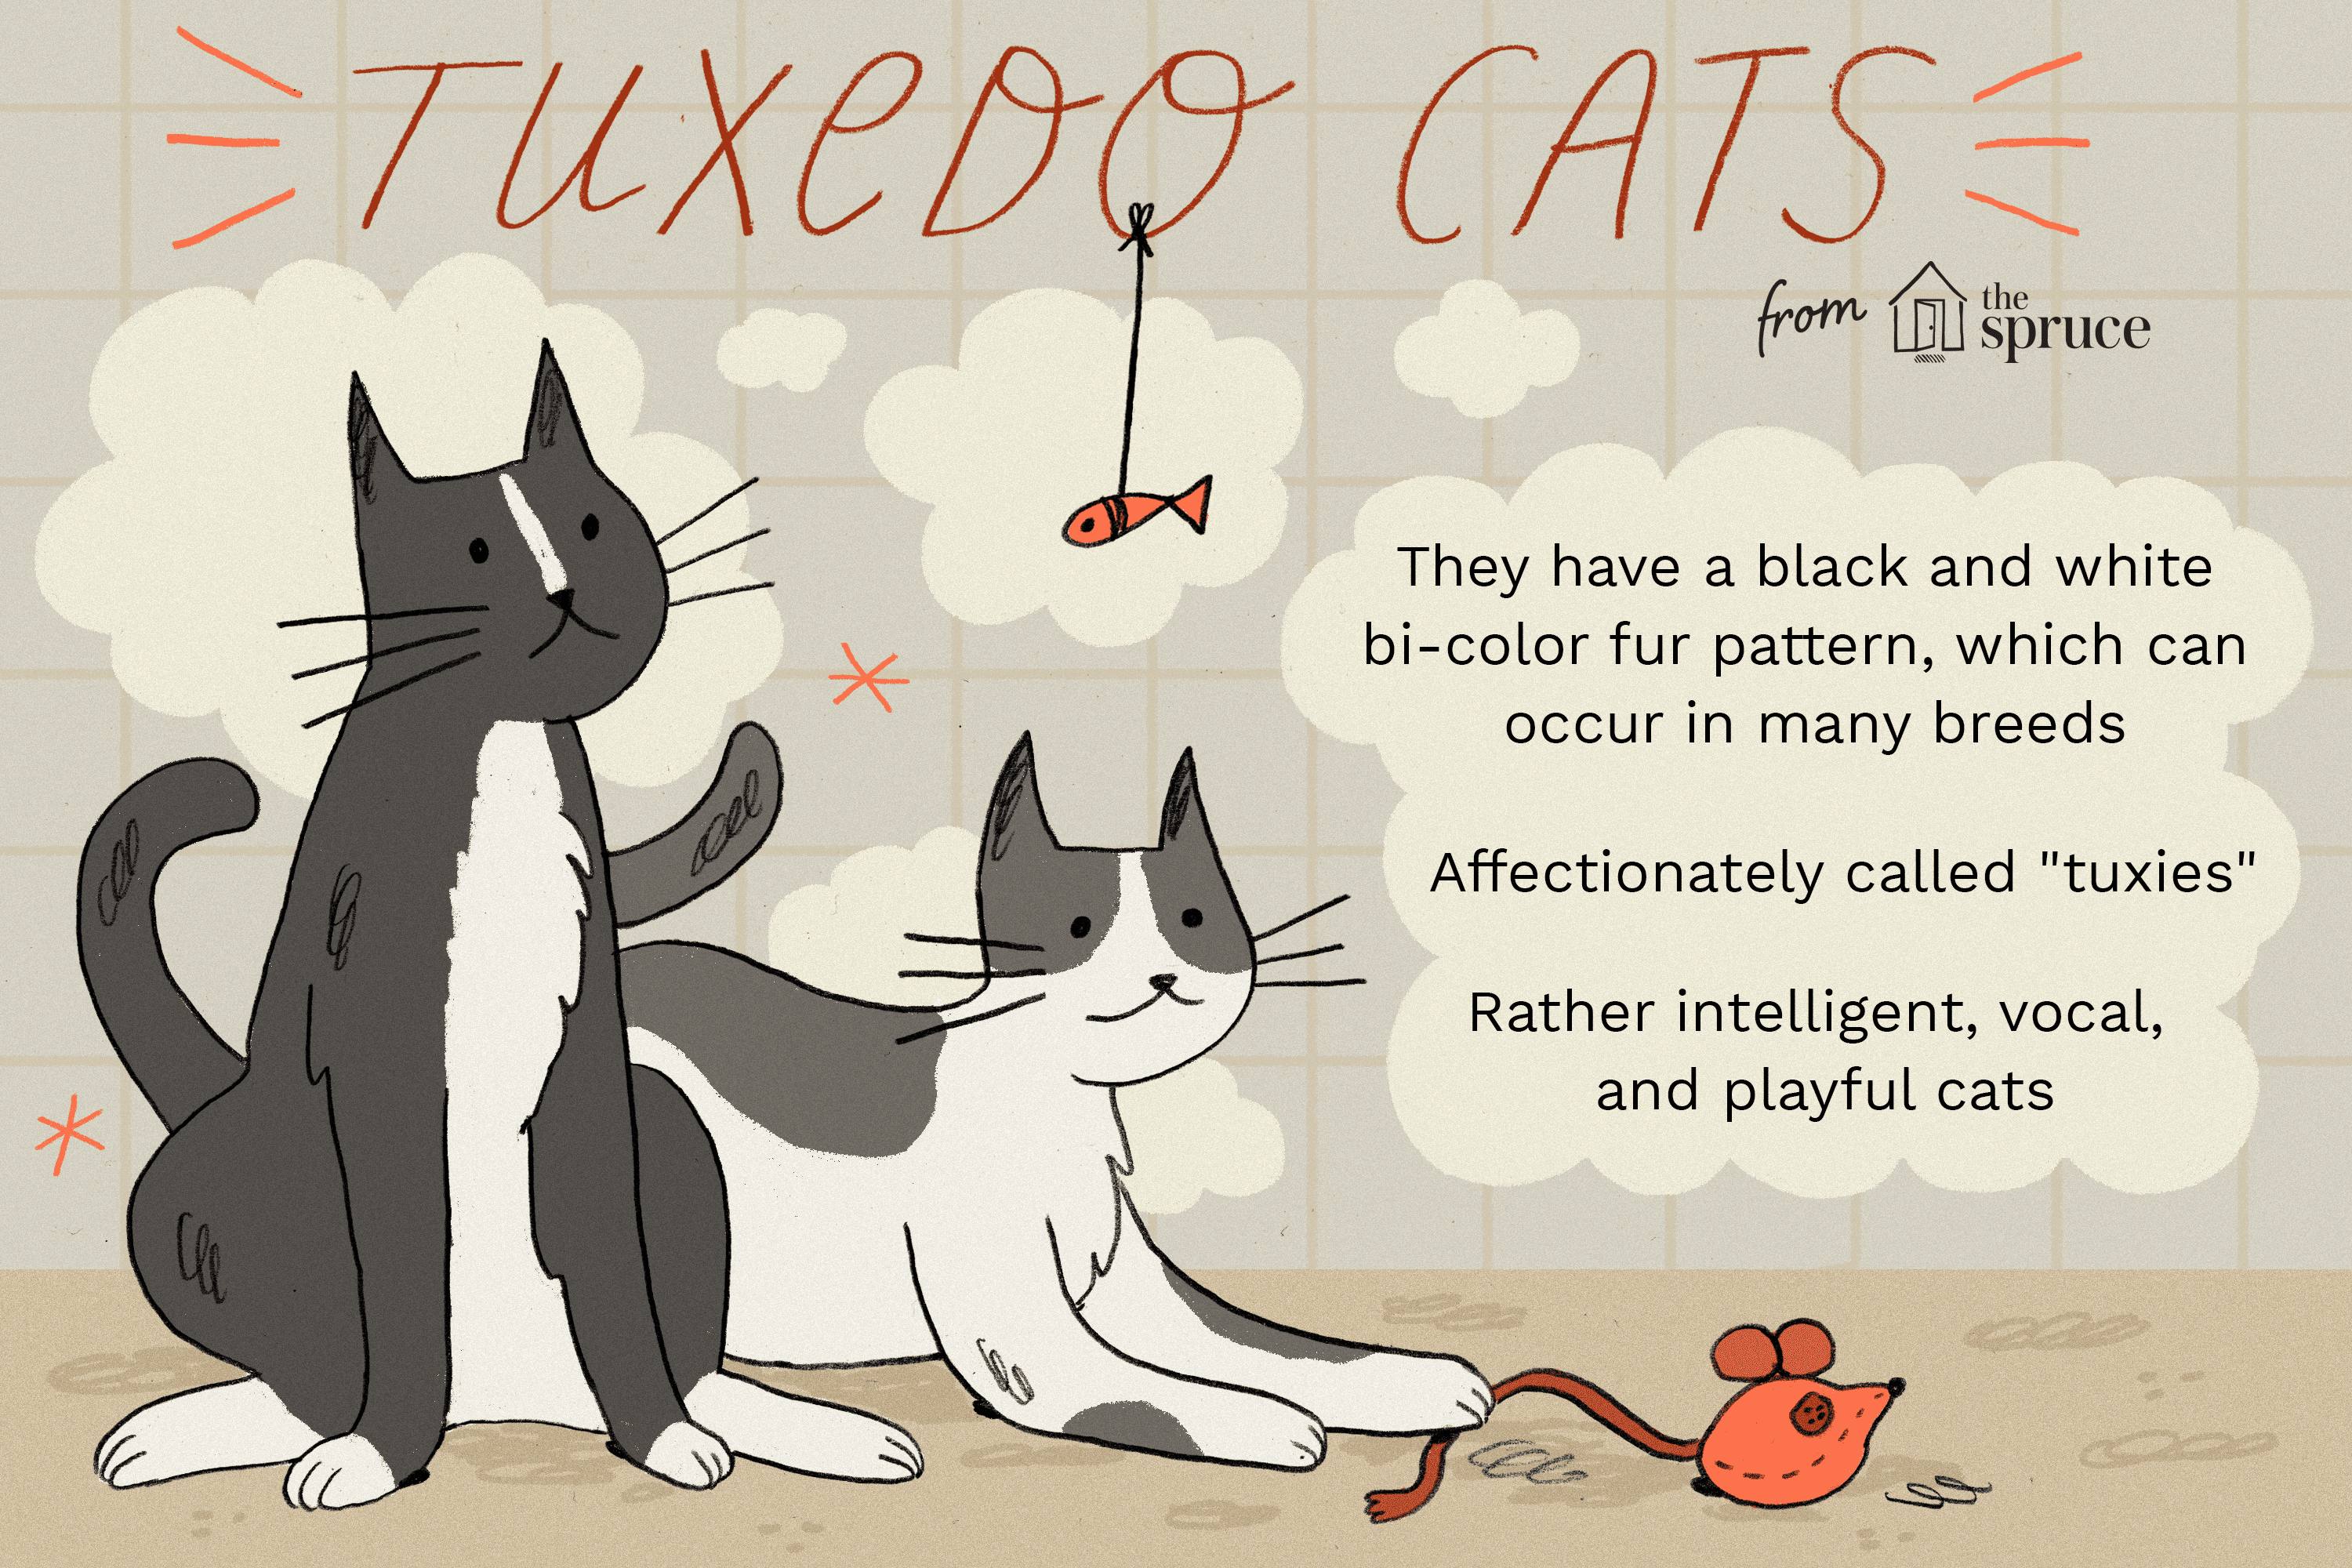 Illustration of a tuxedo cat playing with a toy next to chart of cat facts